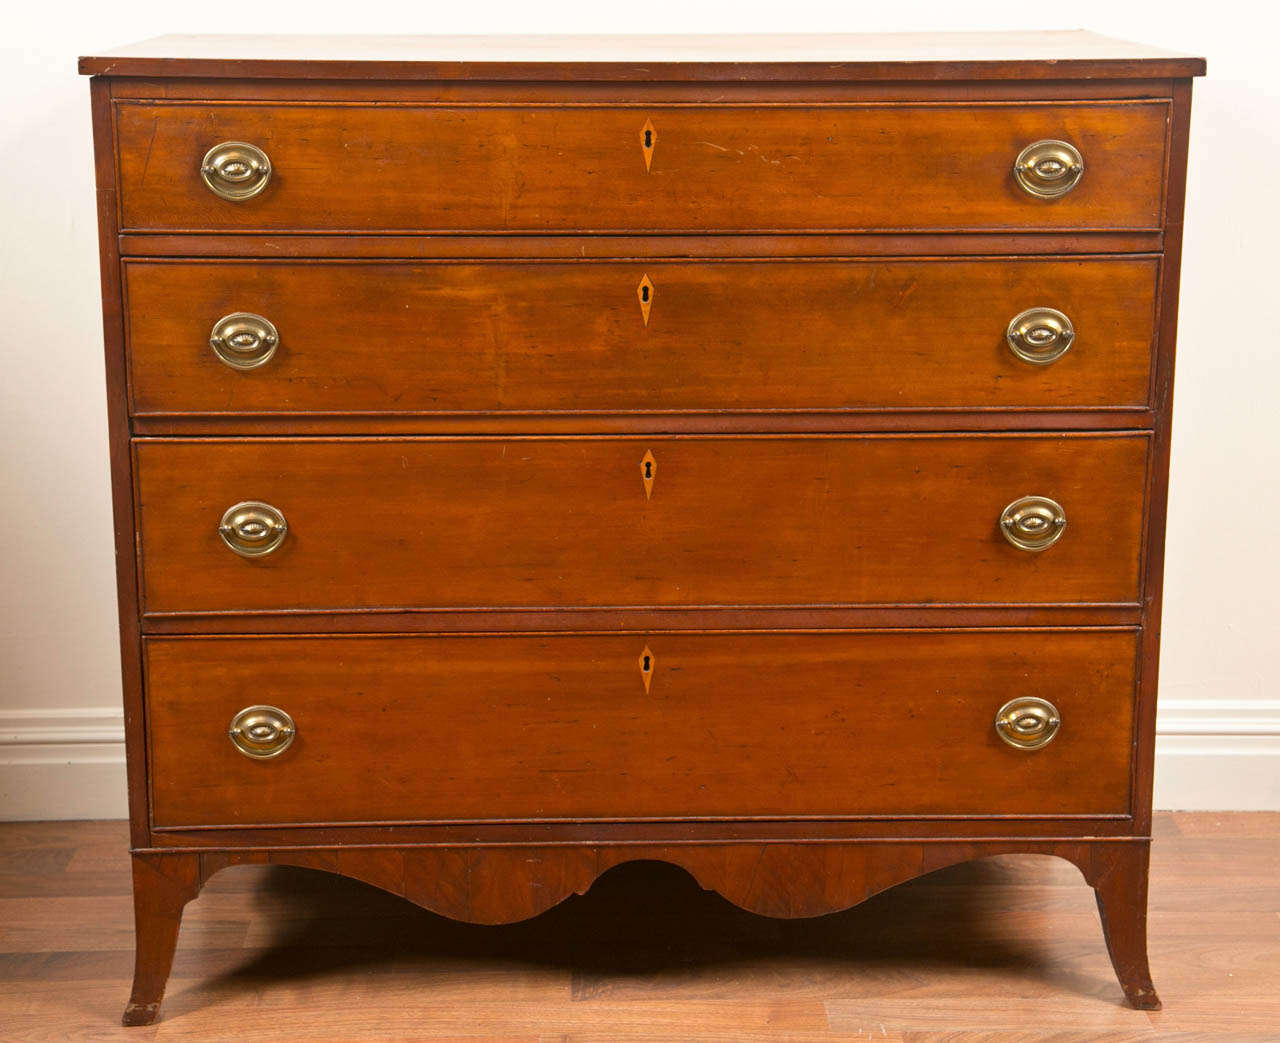 A good American Cherry wood Federal period chest of drawers on a shaped apron and splayed feet, circa 1830.